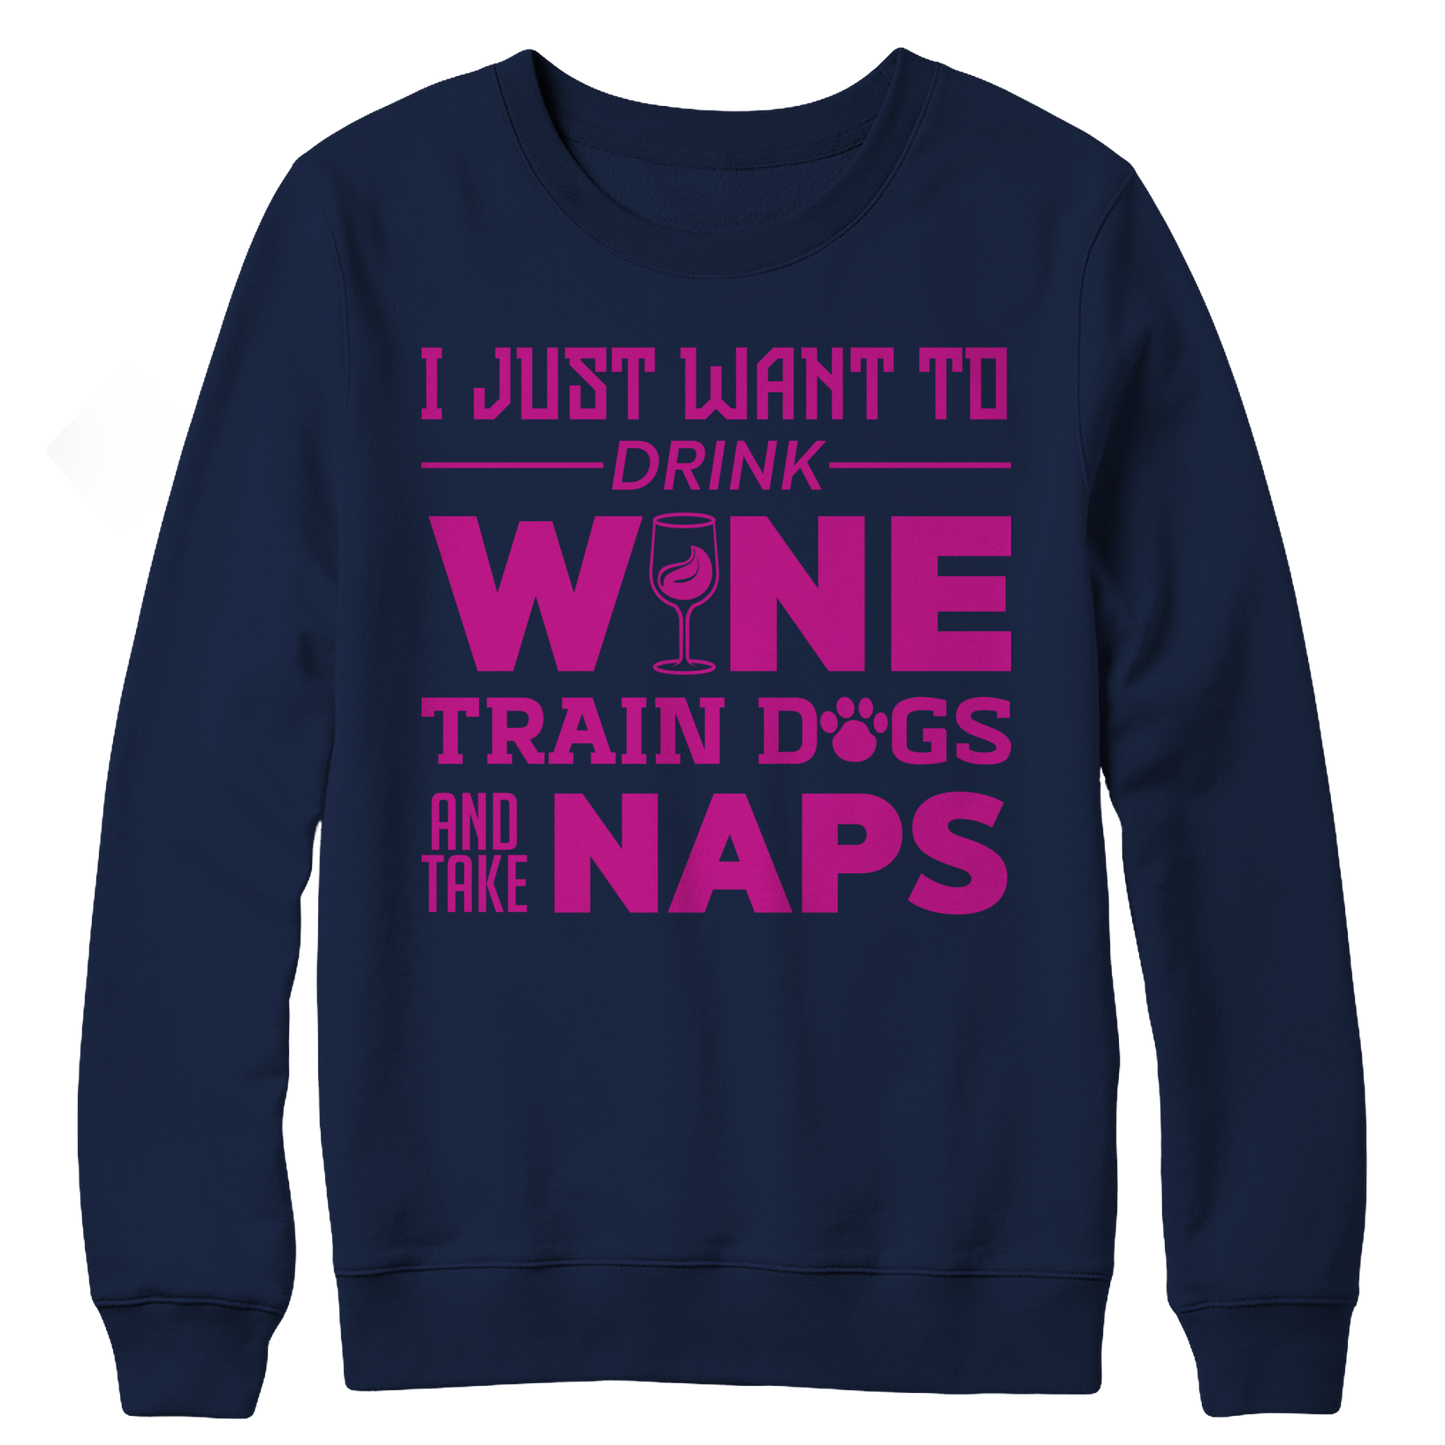 I Just Want To Drink Wine Train Dogs and Take Naps Crewneck Fleece